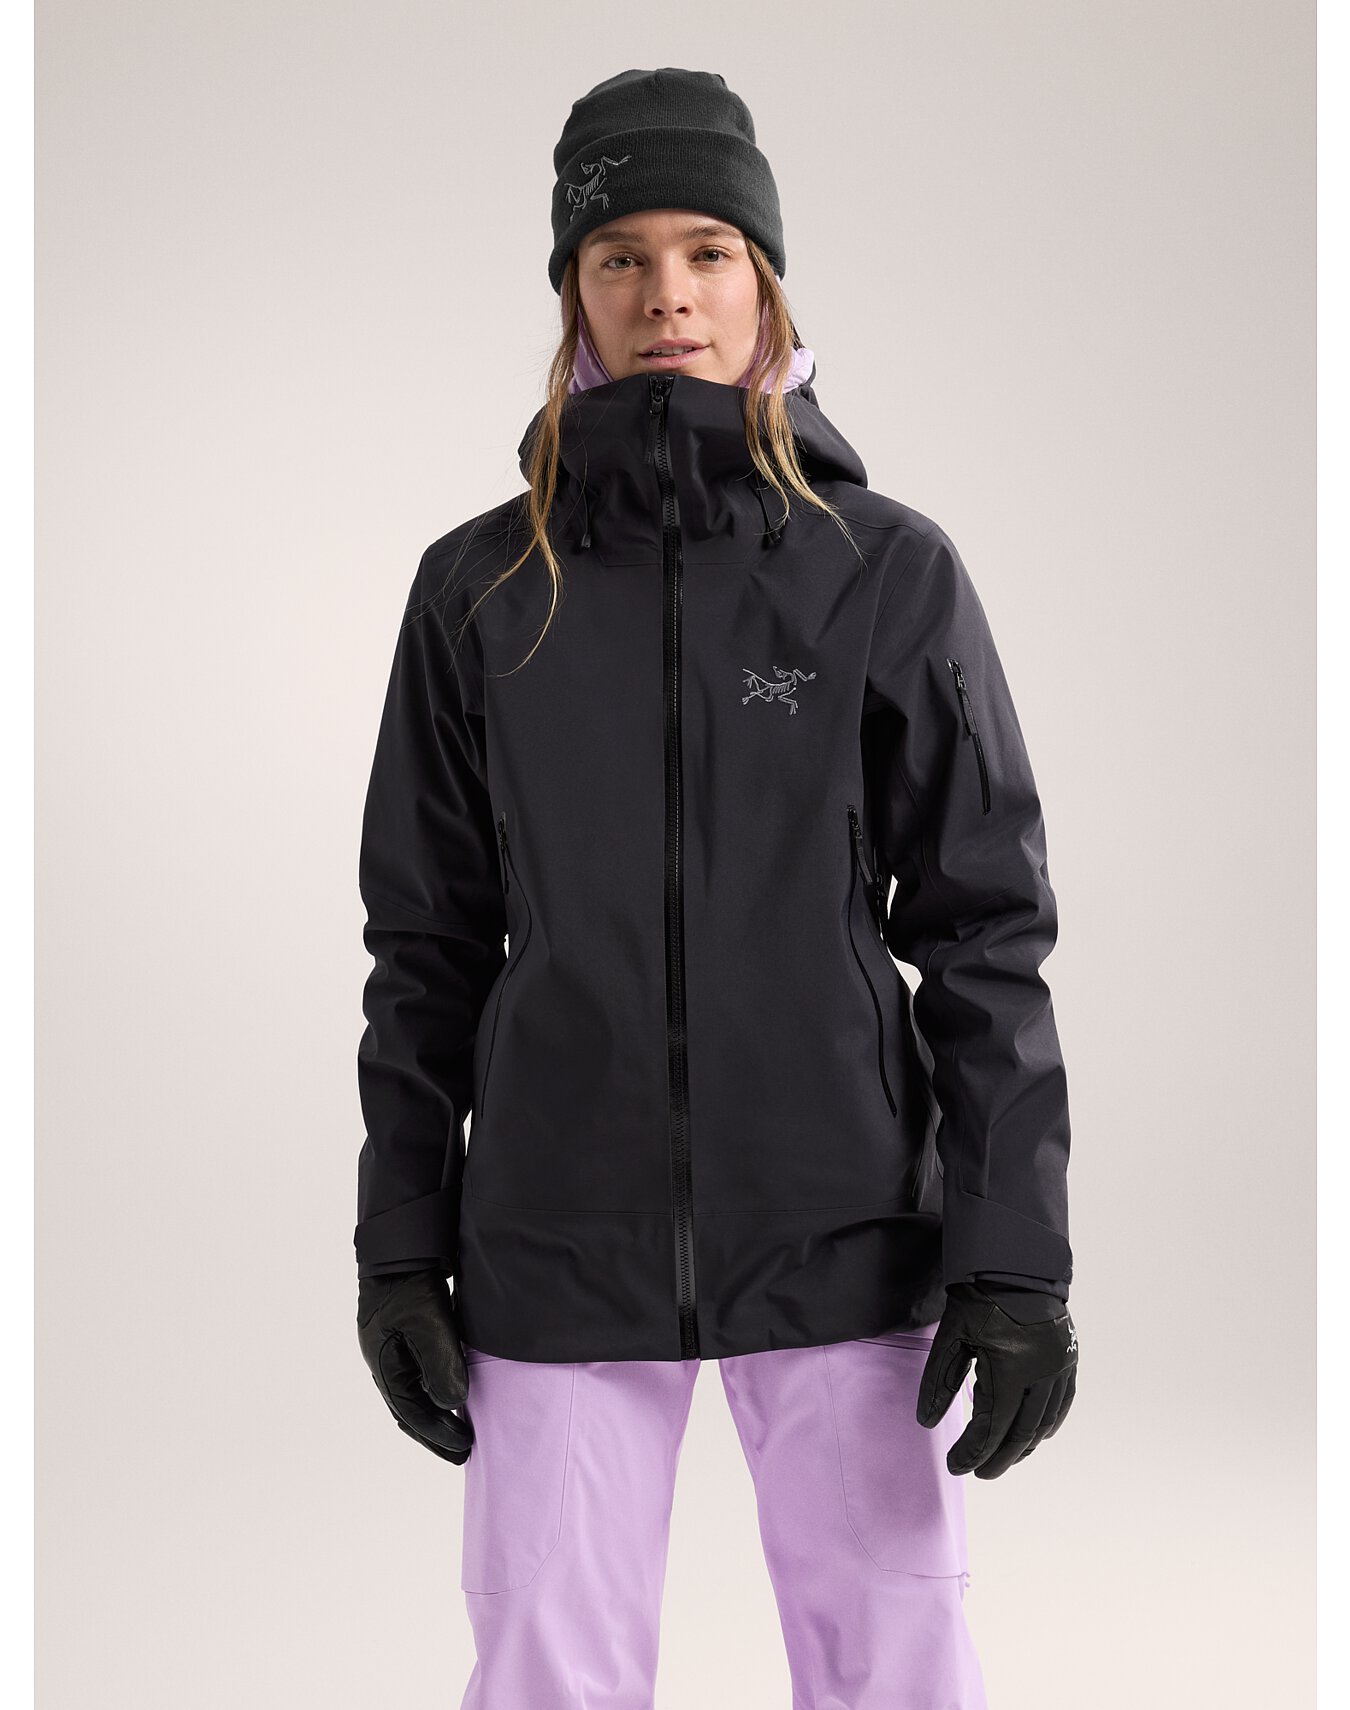 Women's Just Landed | Arc'teryx Outlet